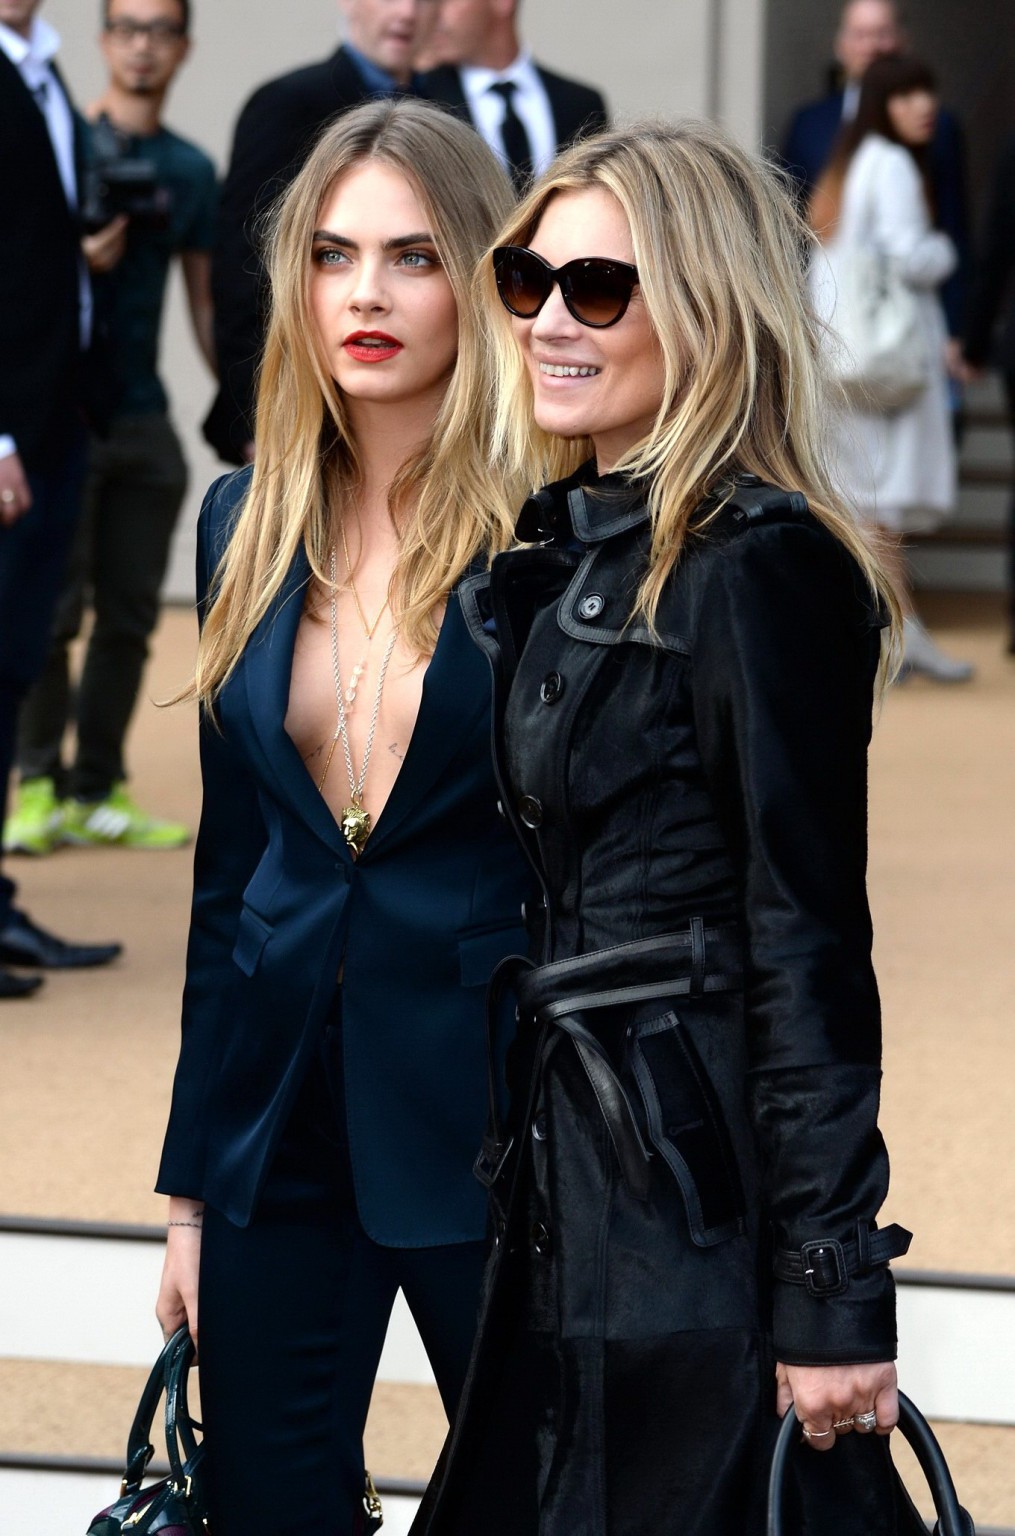 Cara Delevingne braless wearing a wide open jacket at the Burberry Prorsum show  #75185616